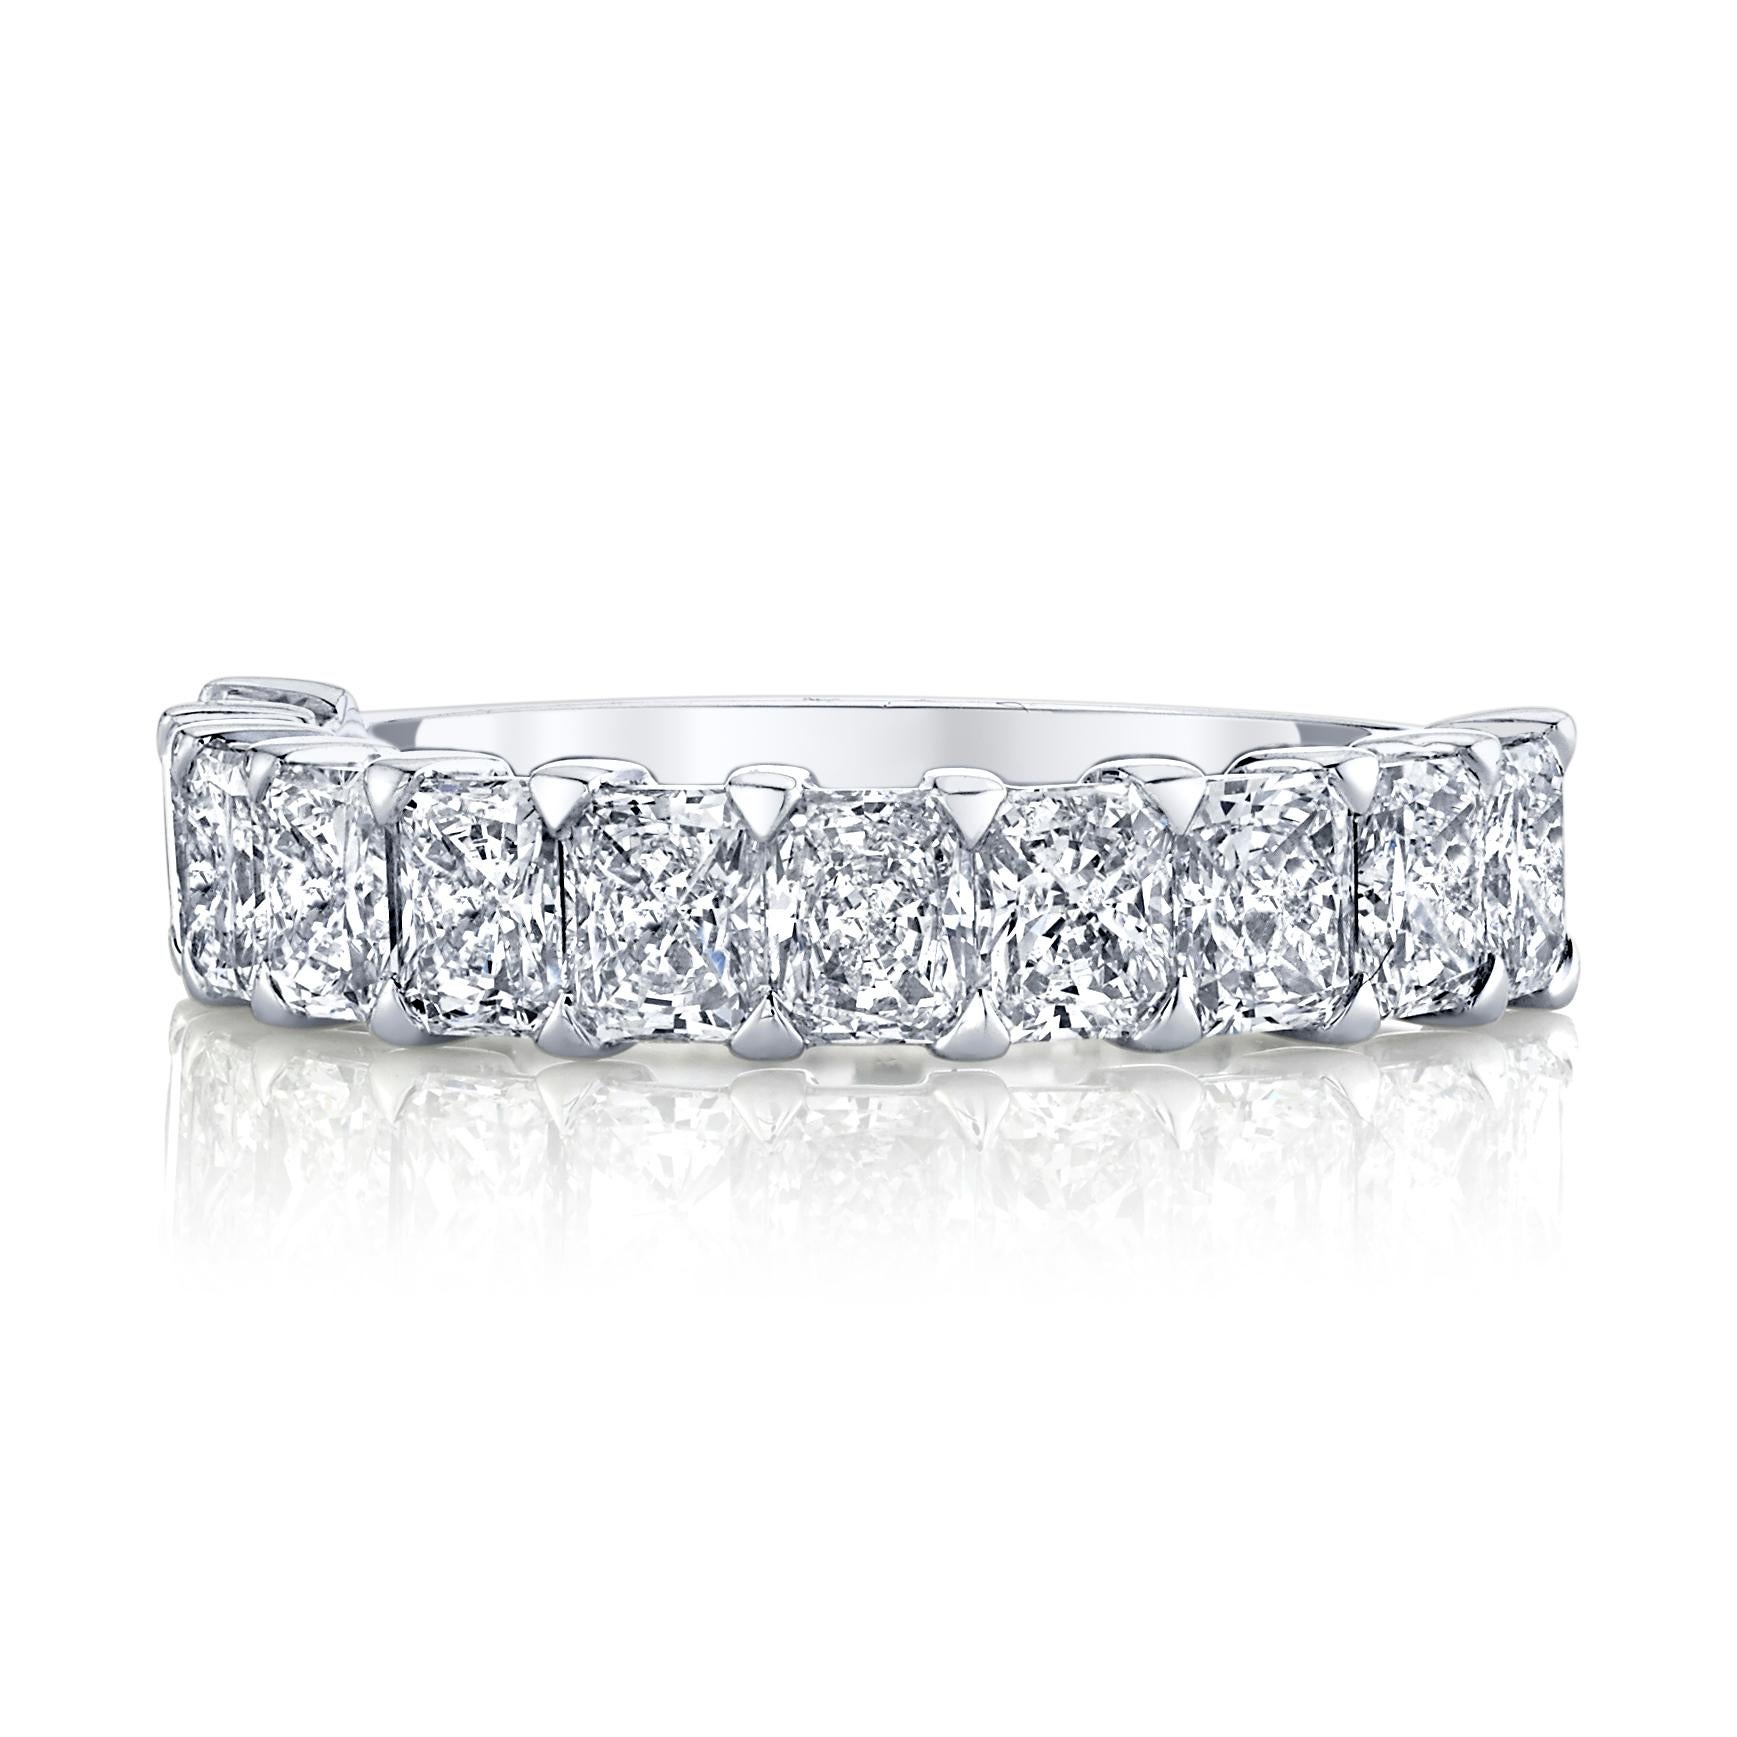 11 Radiant Cut Diamonds set in platinum half way eternity band.
2.10 carat total weights 
Ring size 6.5
Approximate Color F +  Clarity VVS-VS  

*Can be resized by your trusted jeweler or we can resize them for you.